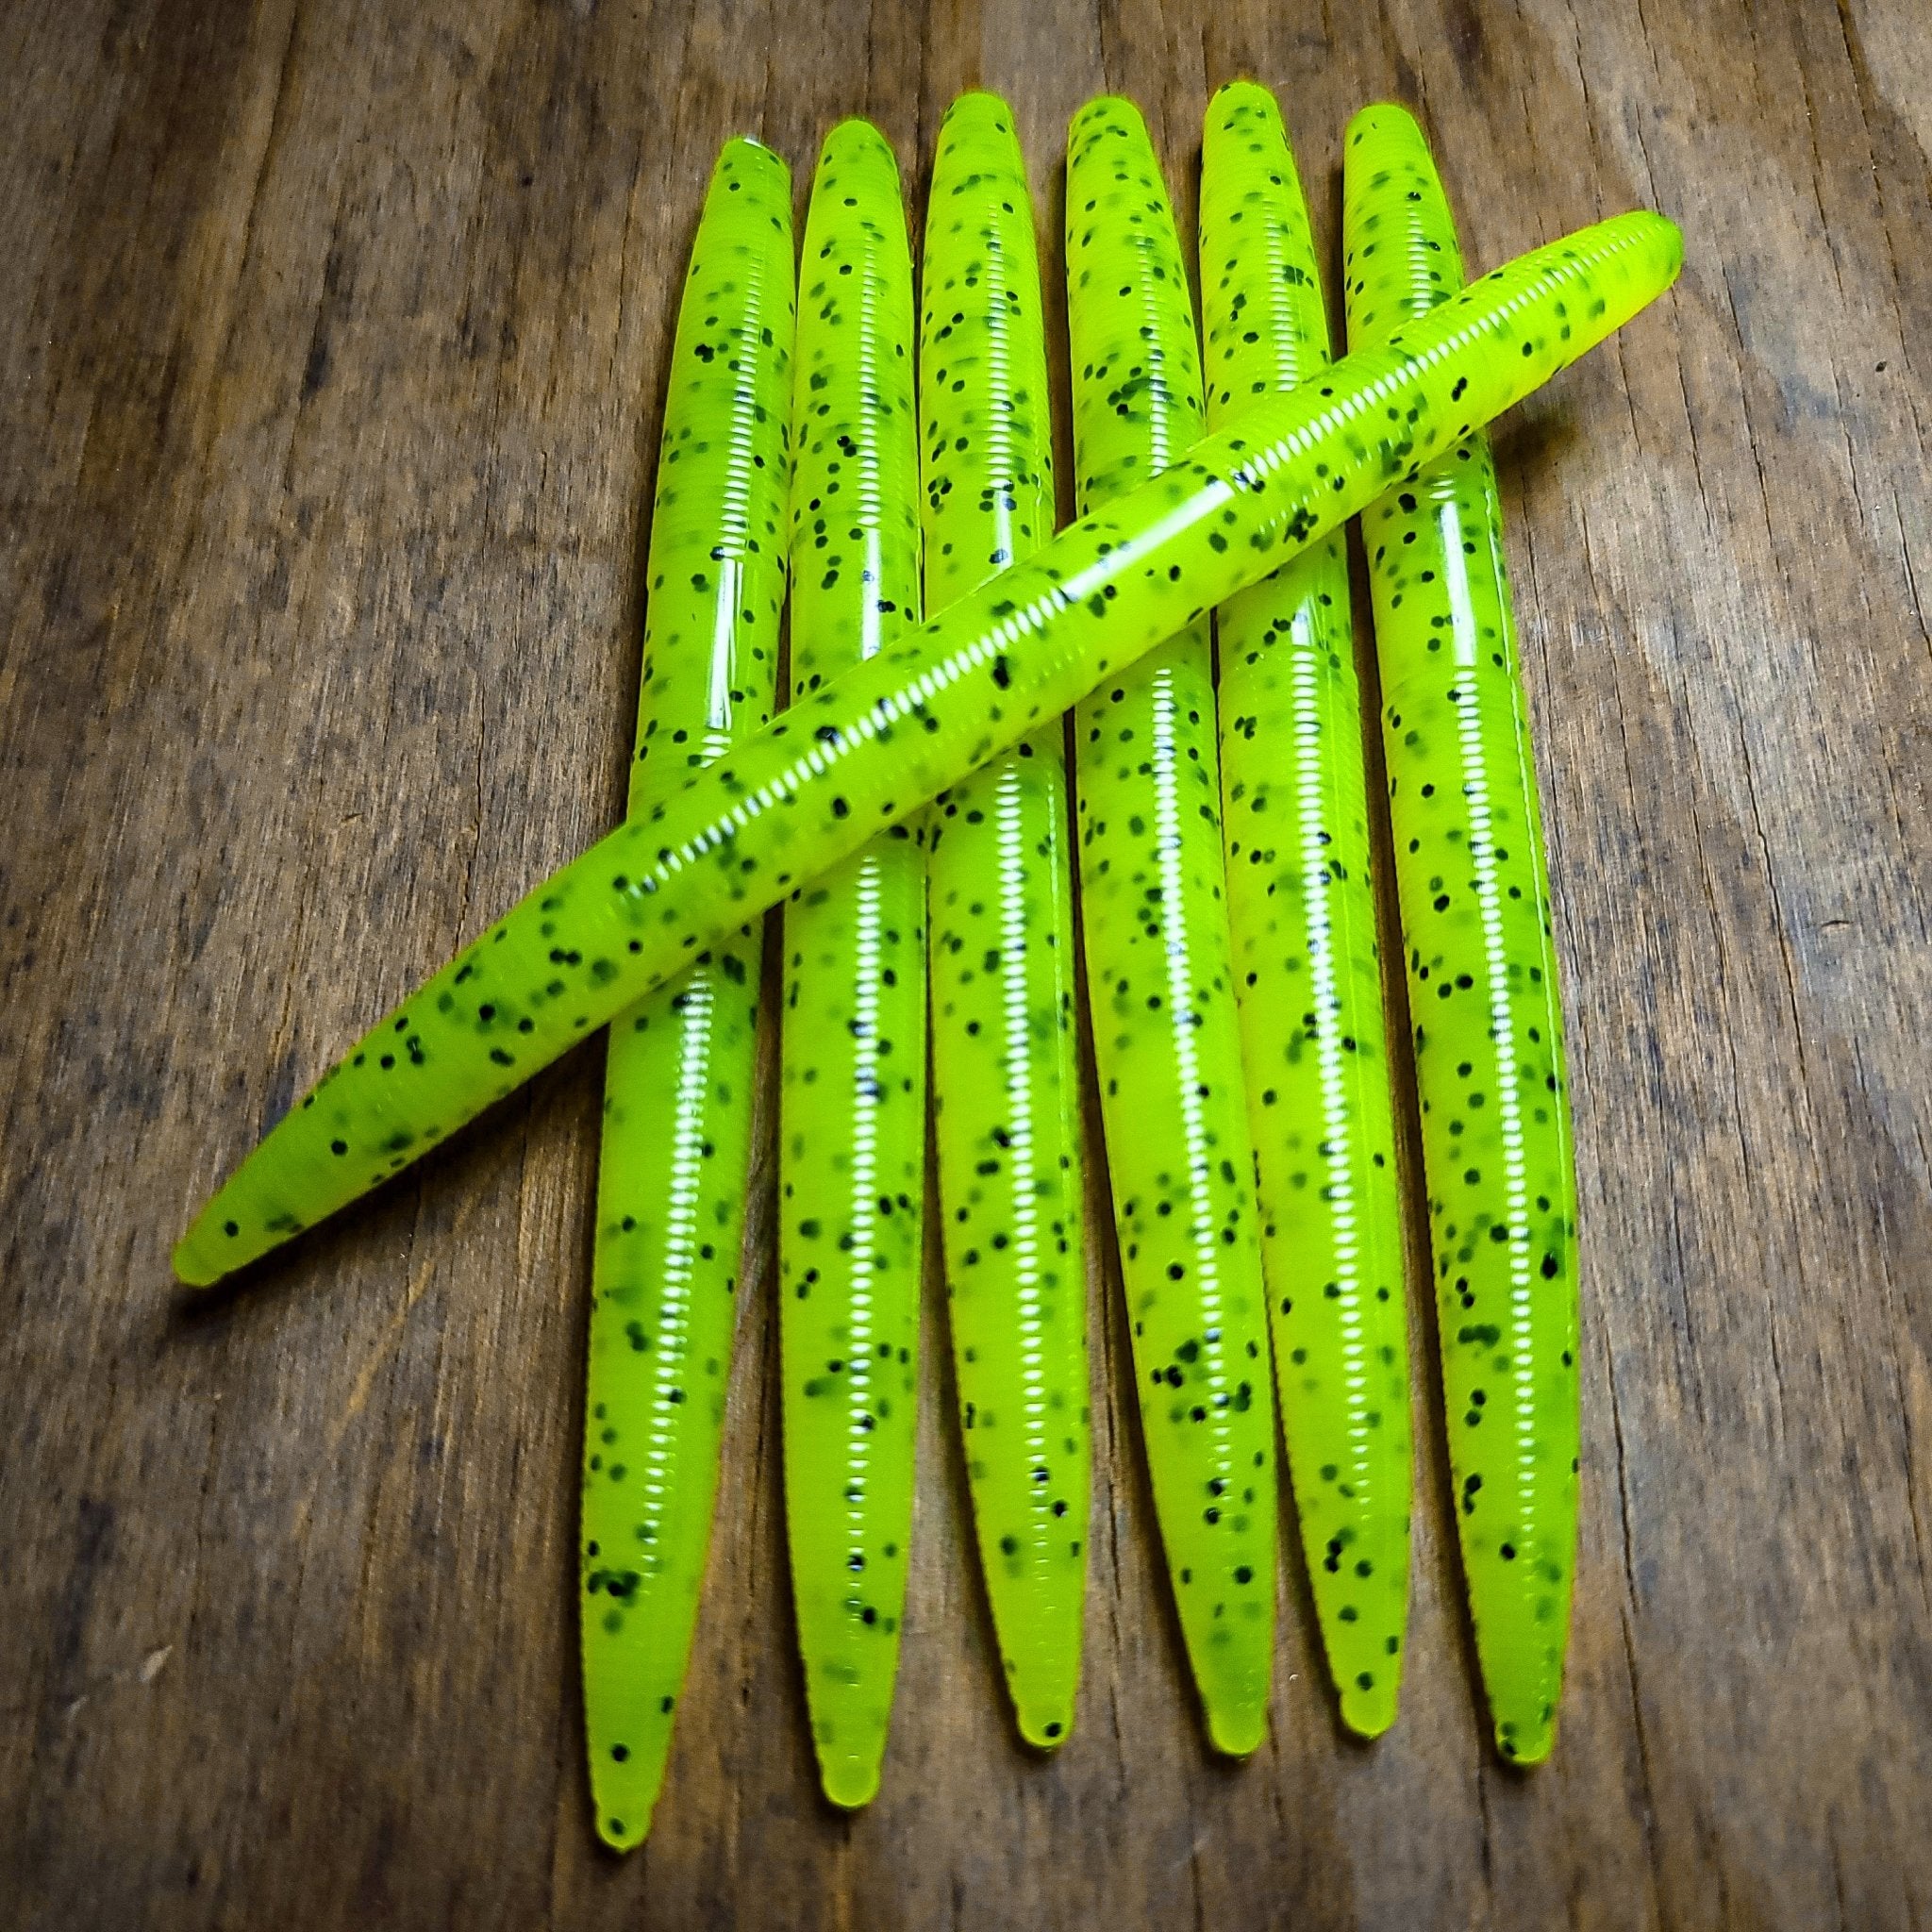 Lip Ripperz Trout Worms - Chartreuse